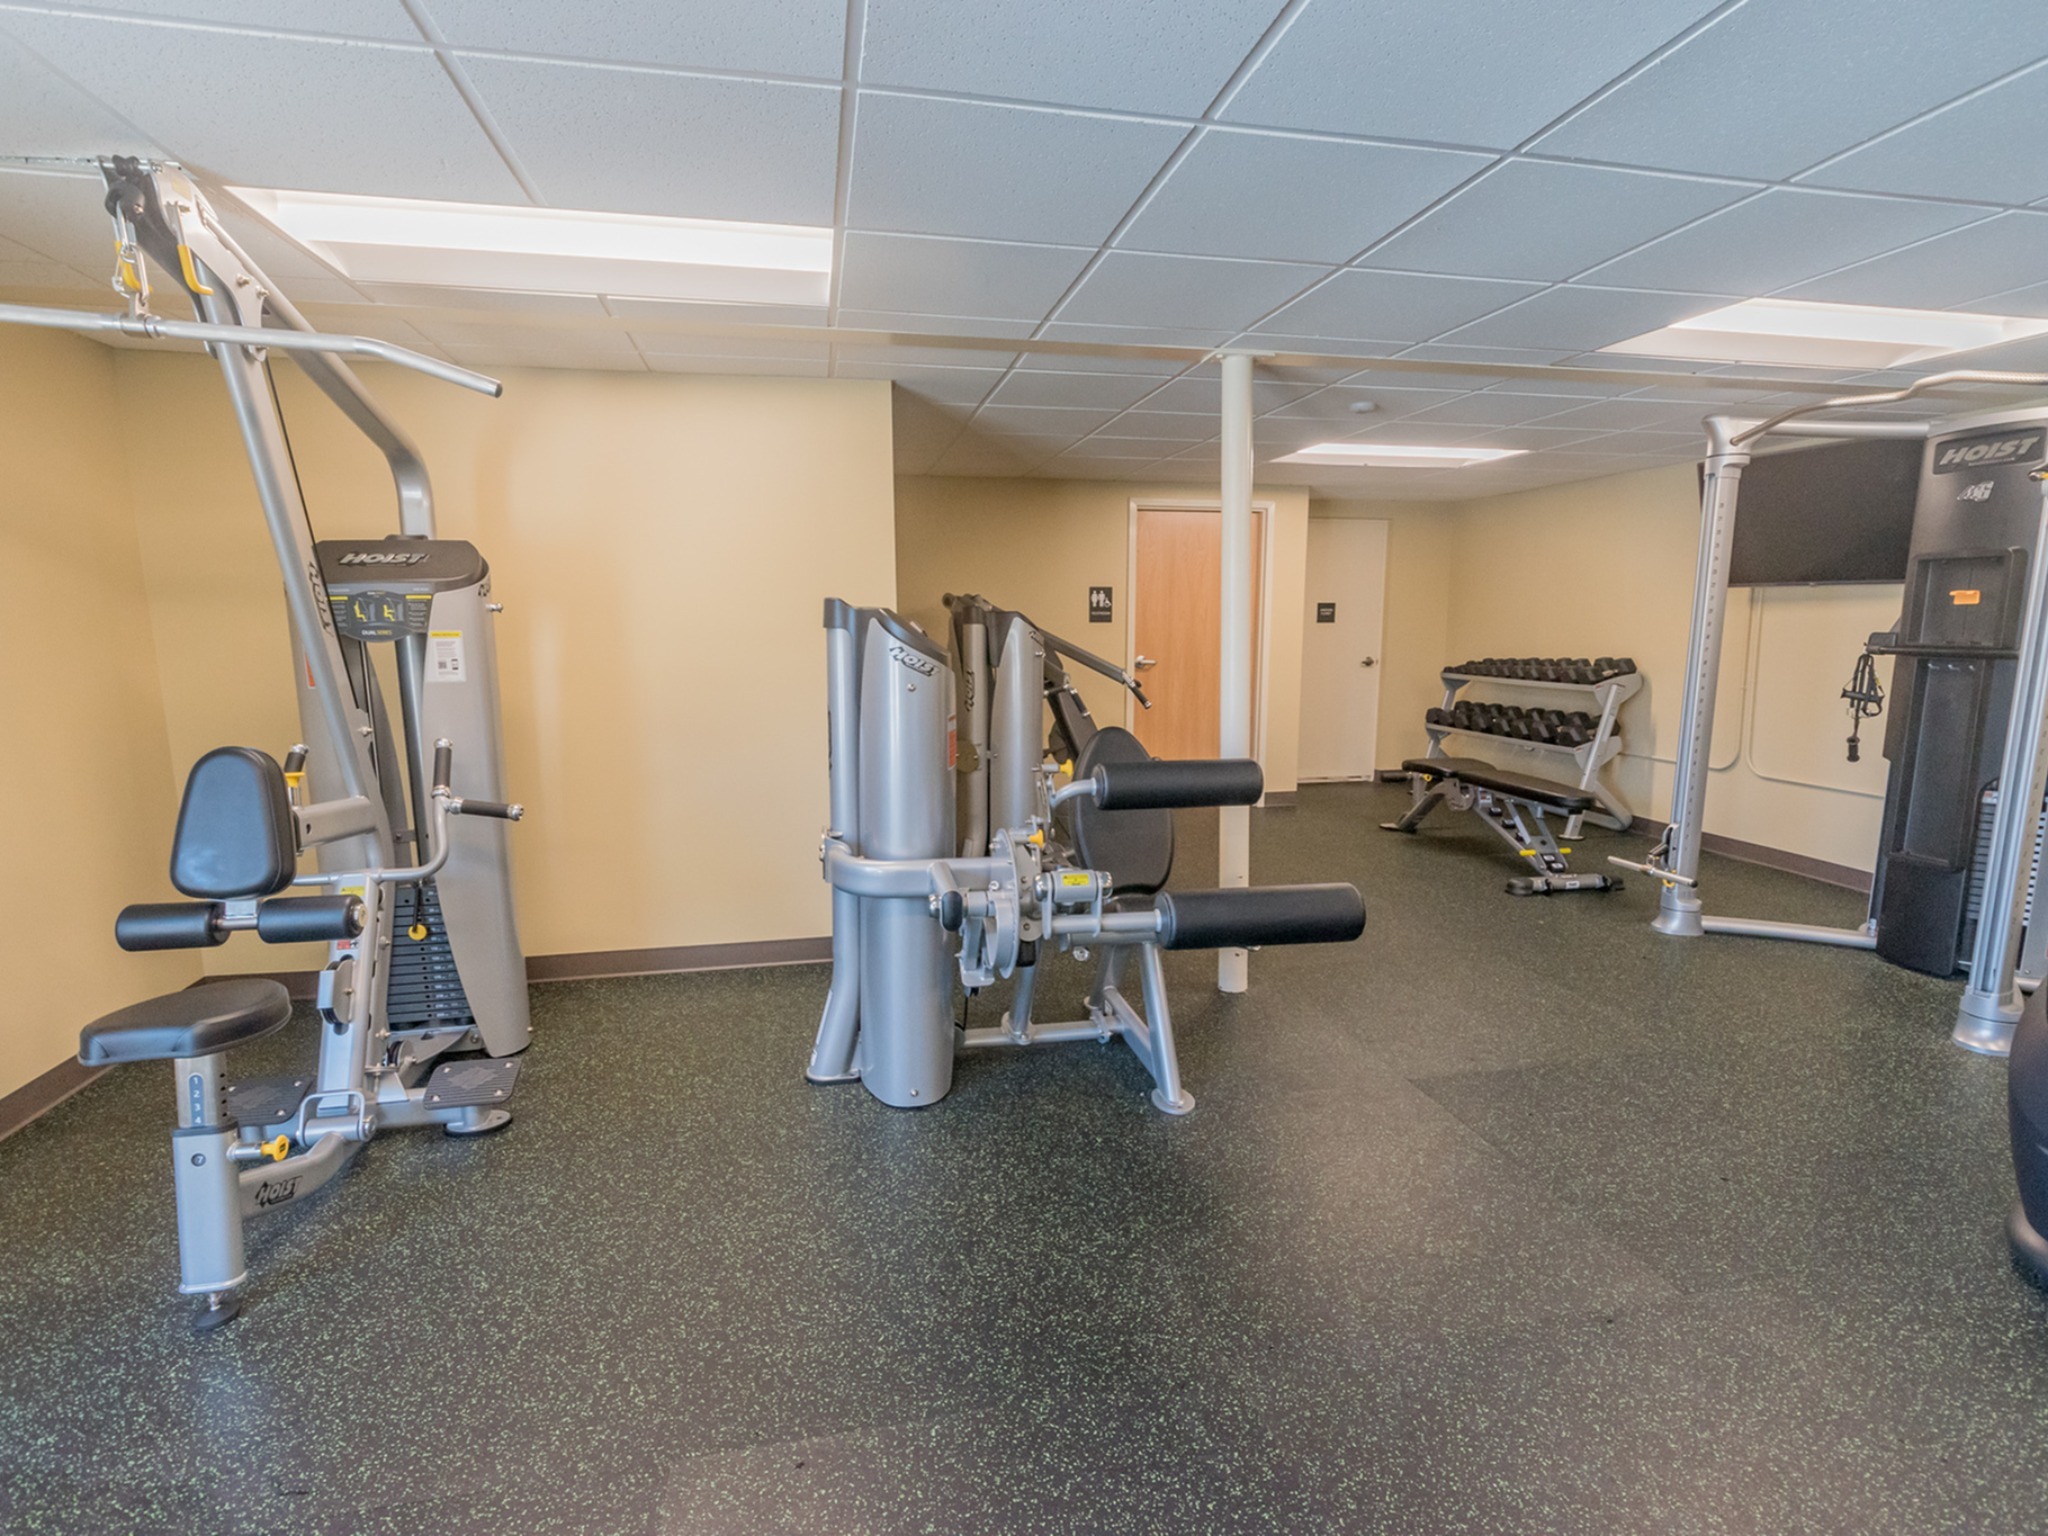 The fitness center area of our community, fitted with fitness equipment, and soft flooring